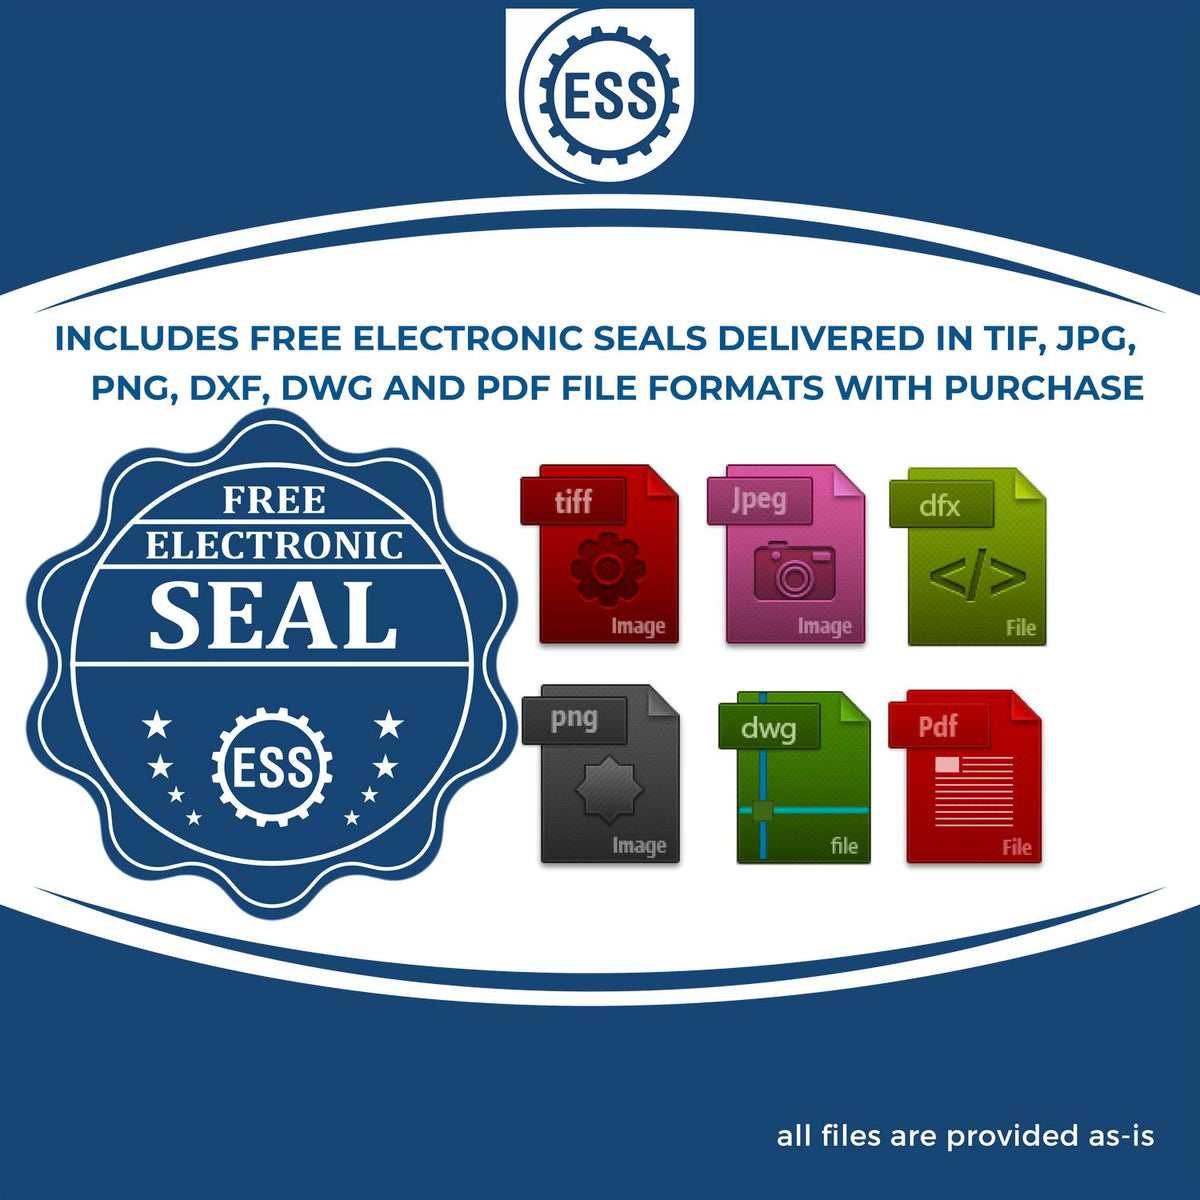 An infographic for the free electronic seal for the Gift Michigan Engineer Seal illustrating the different file type icons such as DXF, DWG, TIF, JPG and PNG.